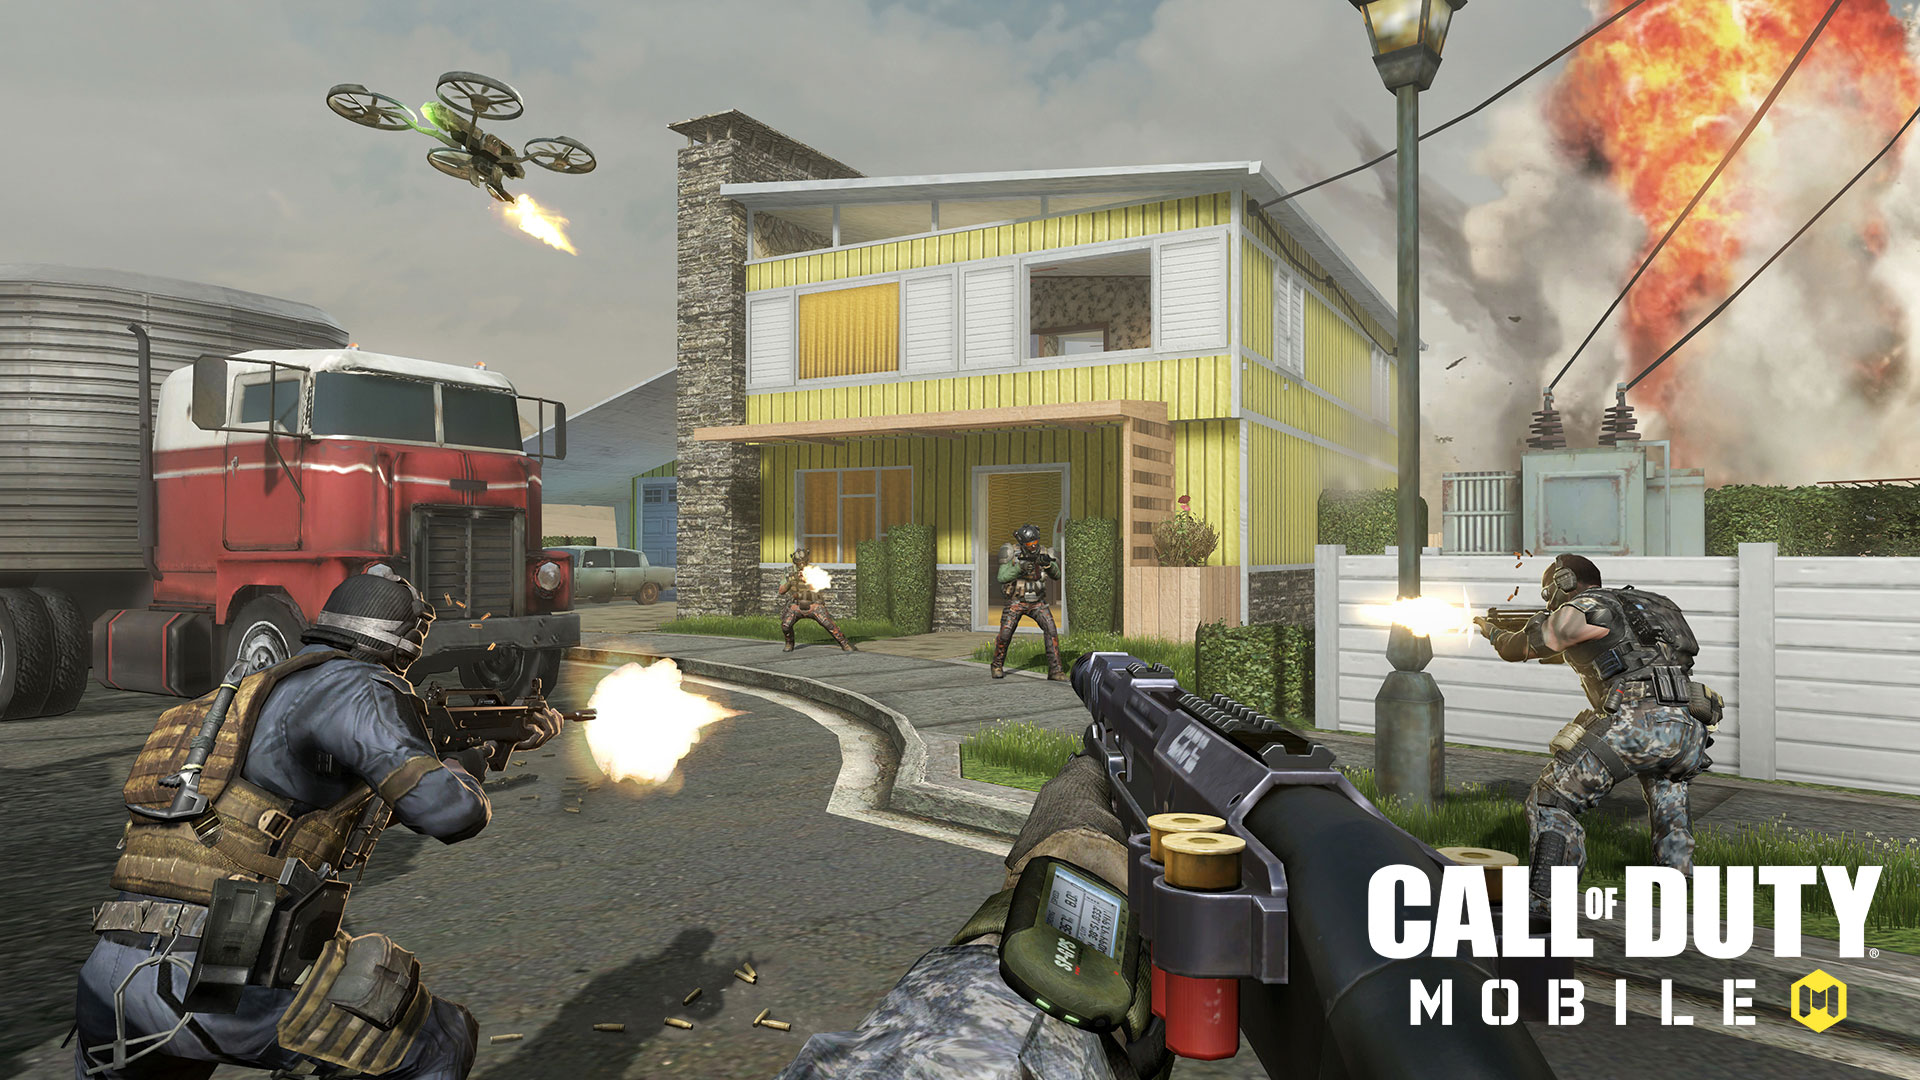 New details on Call of Duty: Mobile announced, including new ... - 